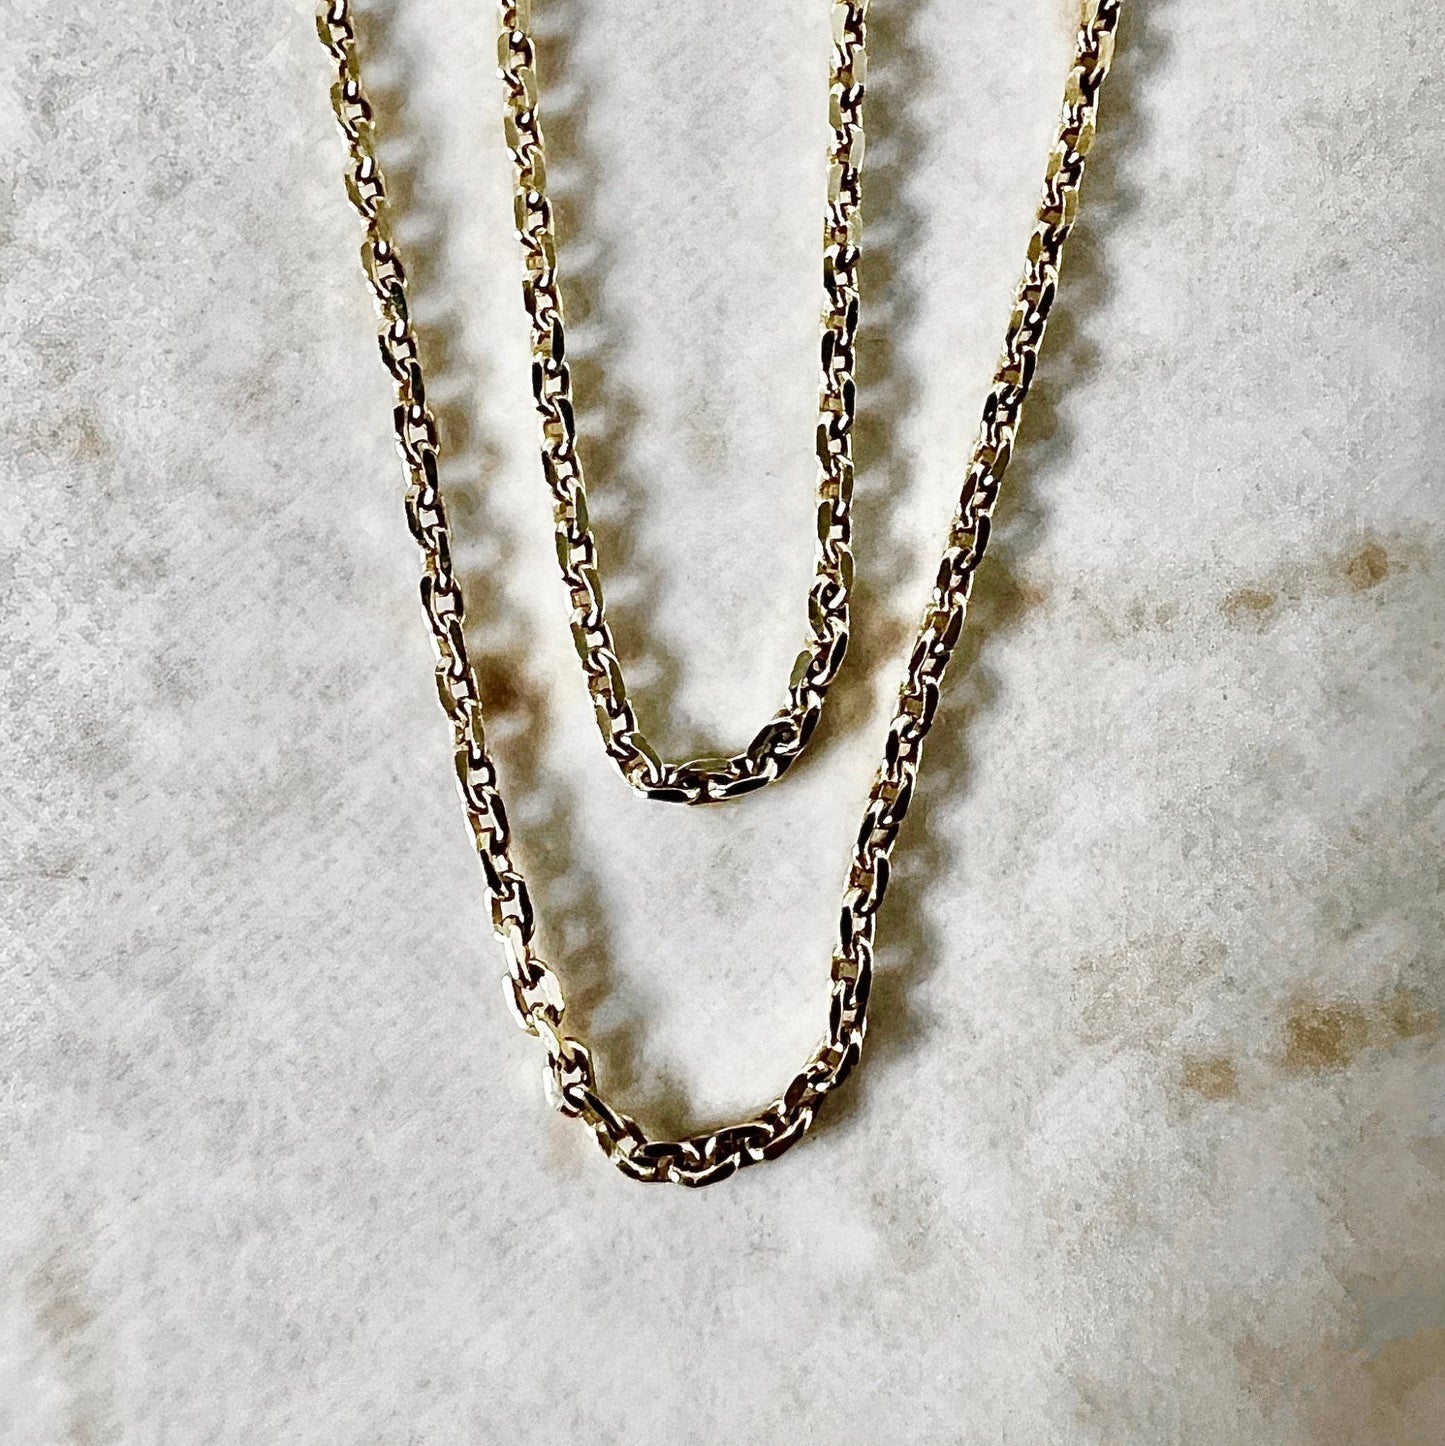 Vintage 18K Yellow Gold Cable Chain - 18” Gold Chain - Yellow Gold Pendant Necklace - Birthday Gift For Her - Holiday Gift - Jewelry Sale